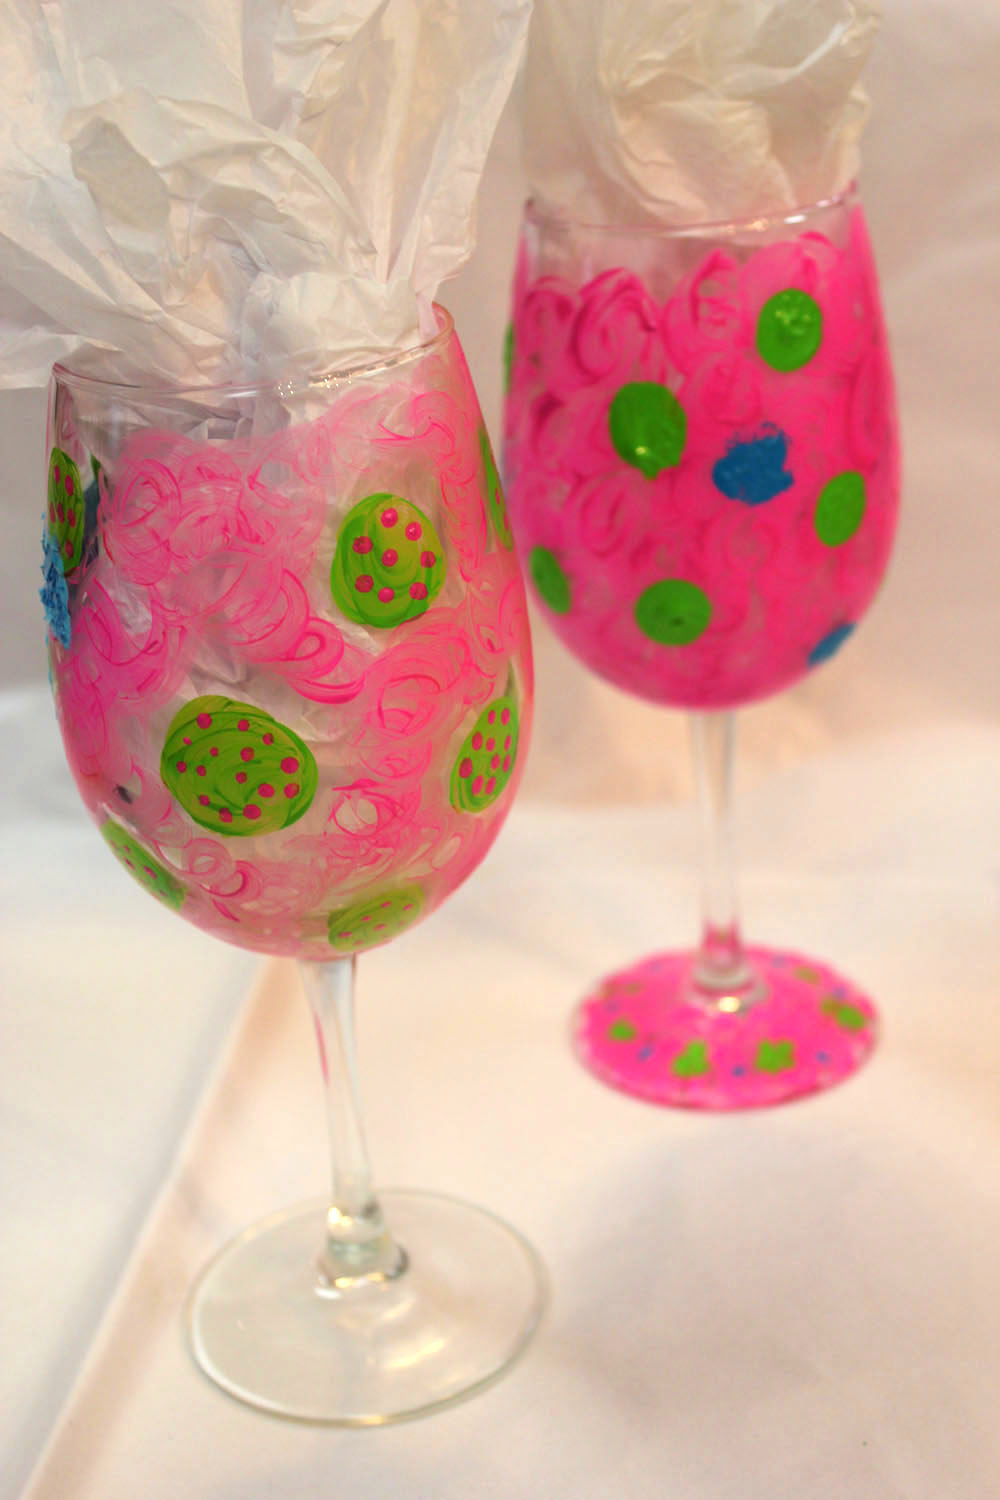 paint-your-own-wine-glasses-pink-with-green-dots-class-art-by-tjm-img_4701.jpg